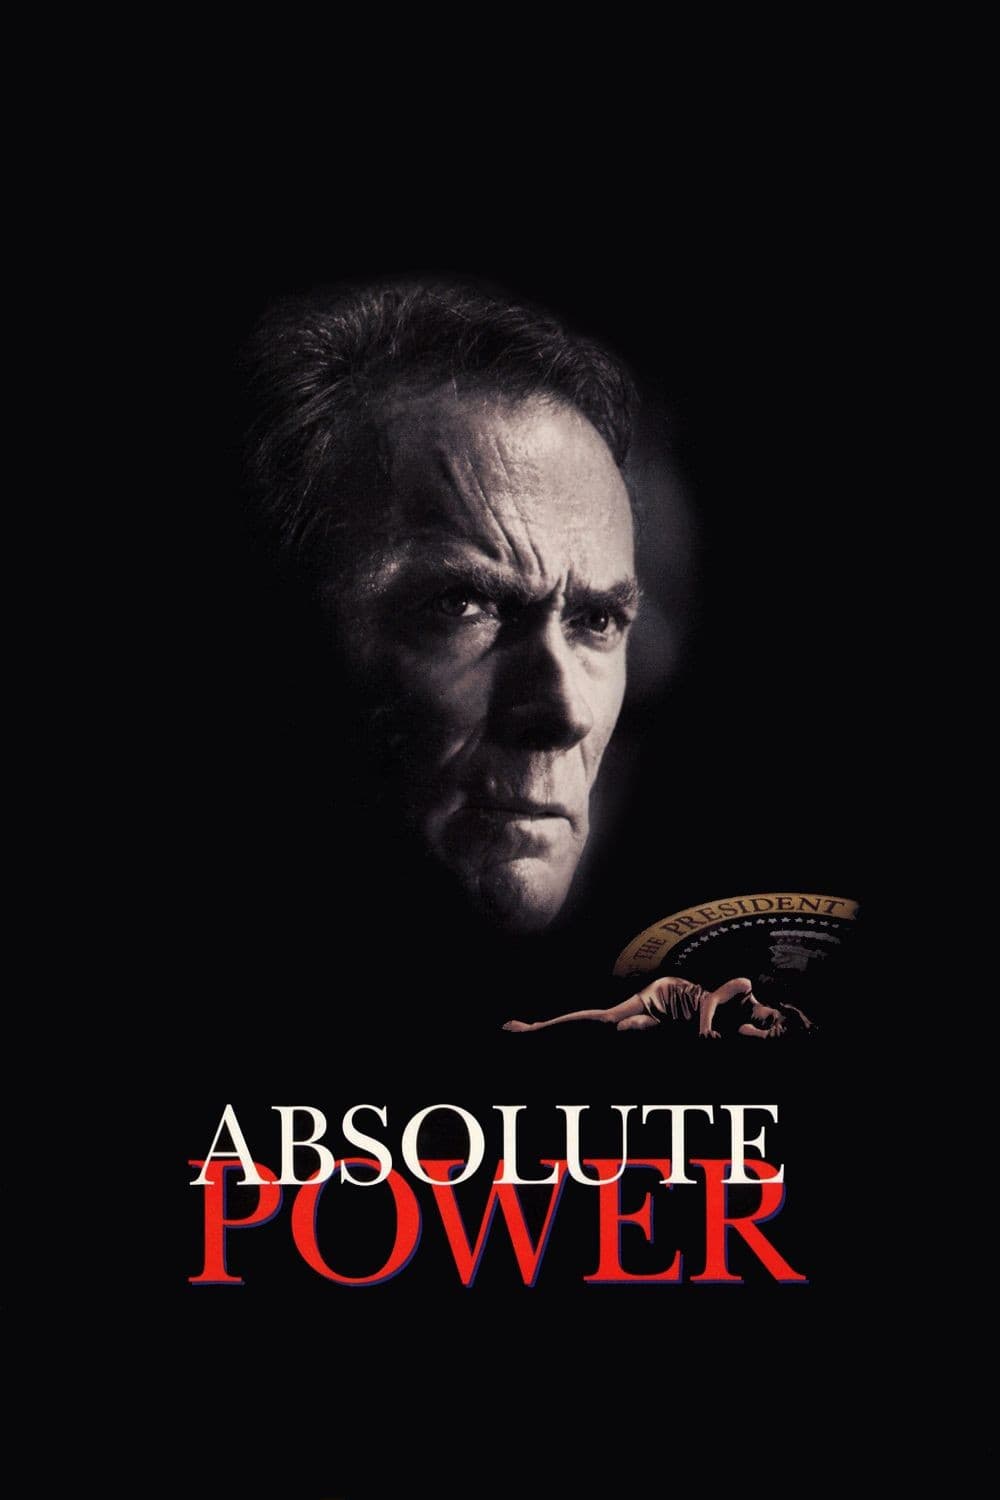 Poster for the movie "Absolute Power"